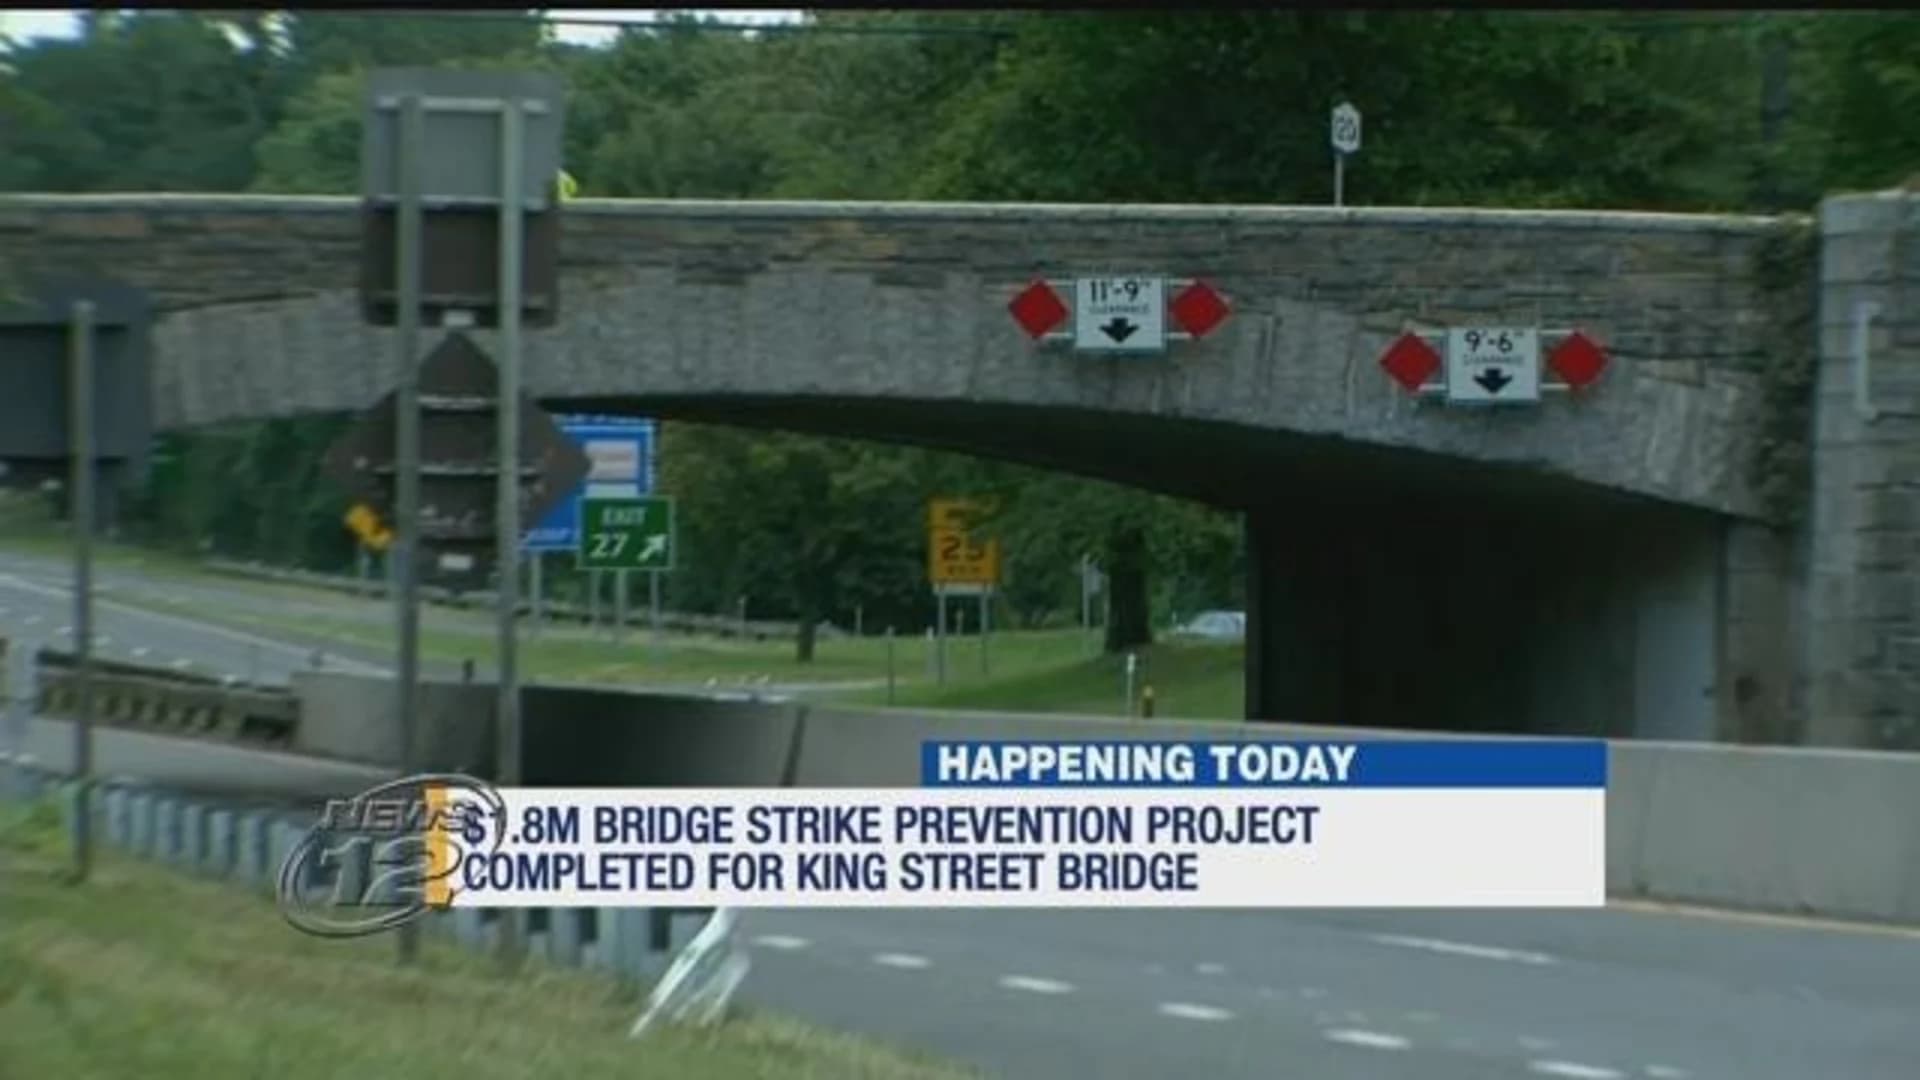 King Street Bridge project completed, meant to curb bridge strikes